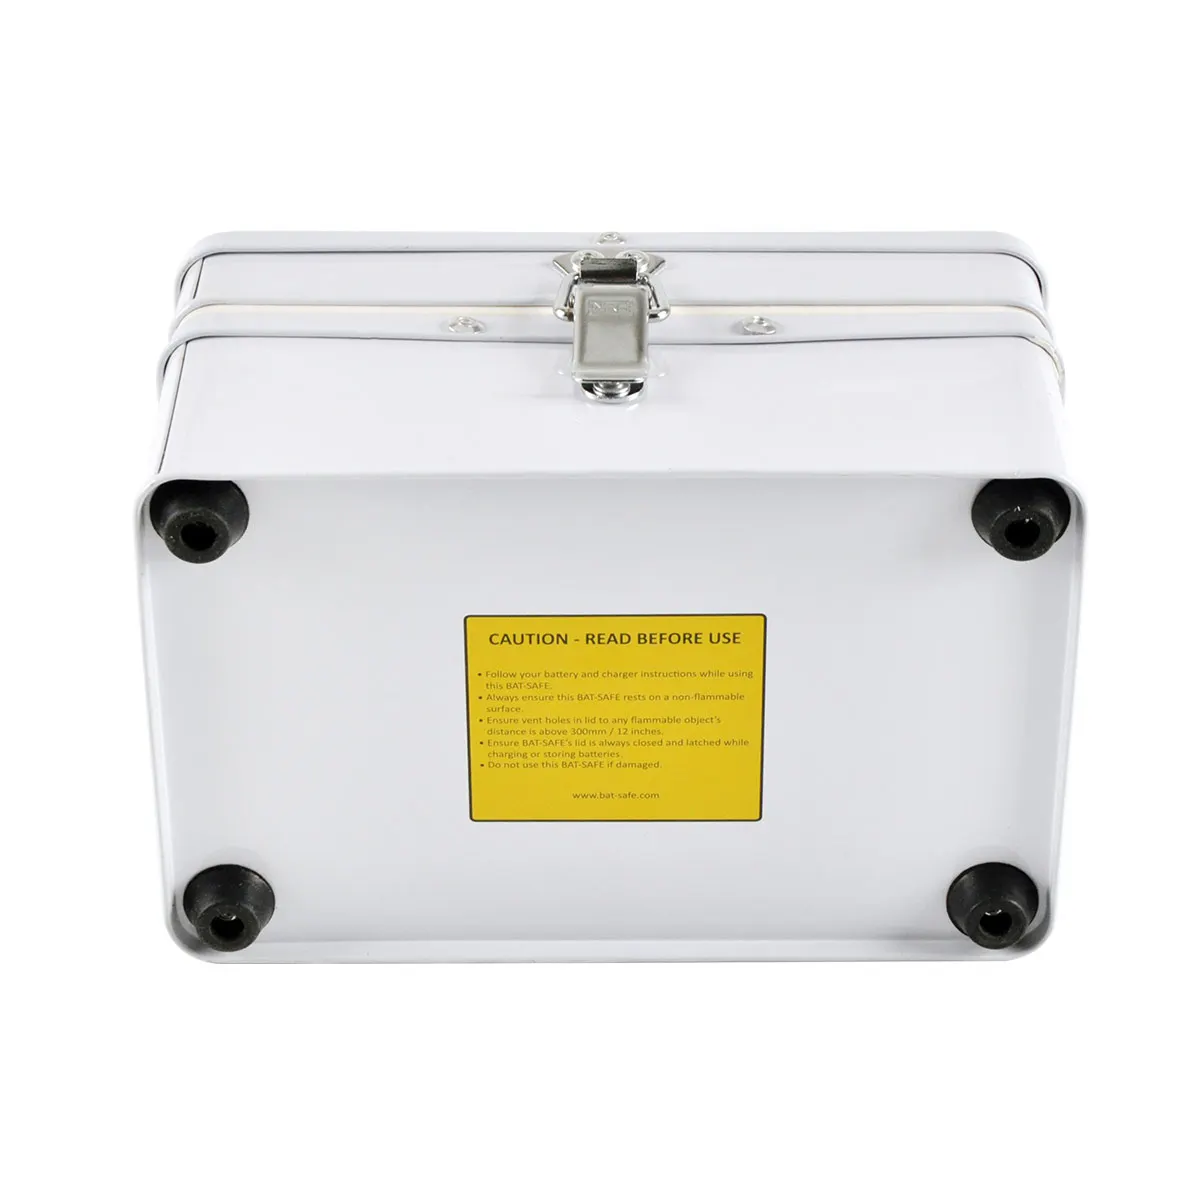 Fireproof Aluminum Case Explosion-Proof Portable Lipo Battery Safety Box for RC Aircraft Car FPV Drone enlarge